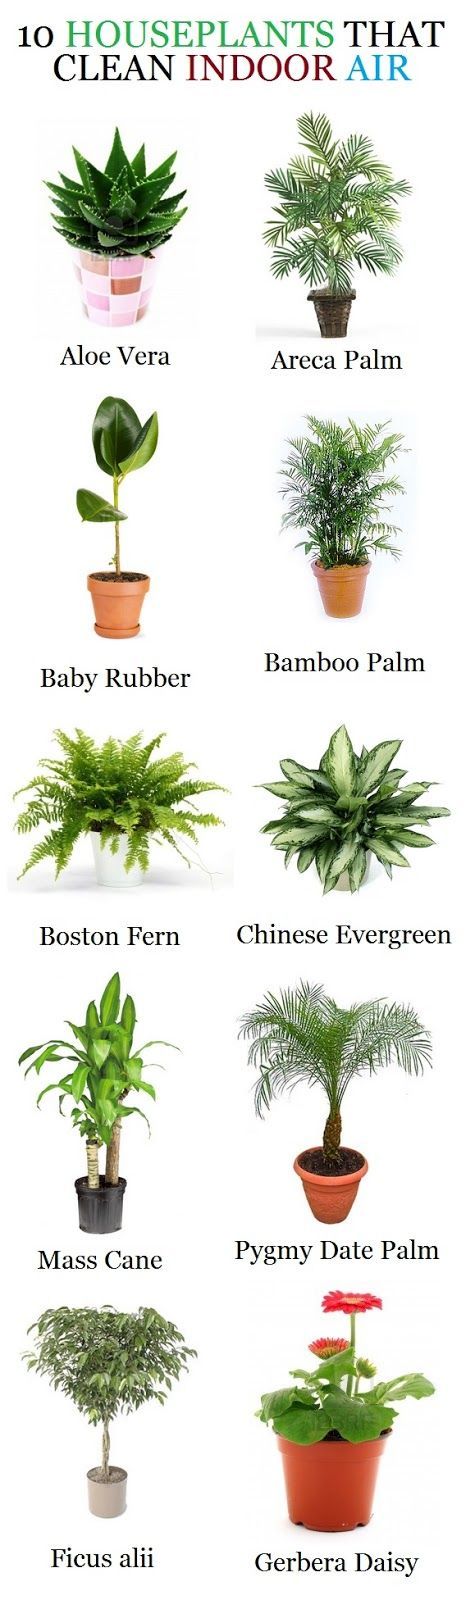 Natural Air Filters. Great during the Haze. 10 HOUSEPLANTS THAT CLEAN INDOOR AIR